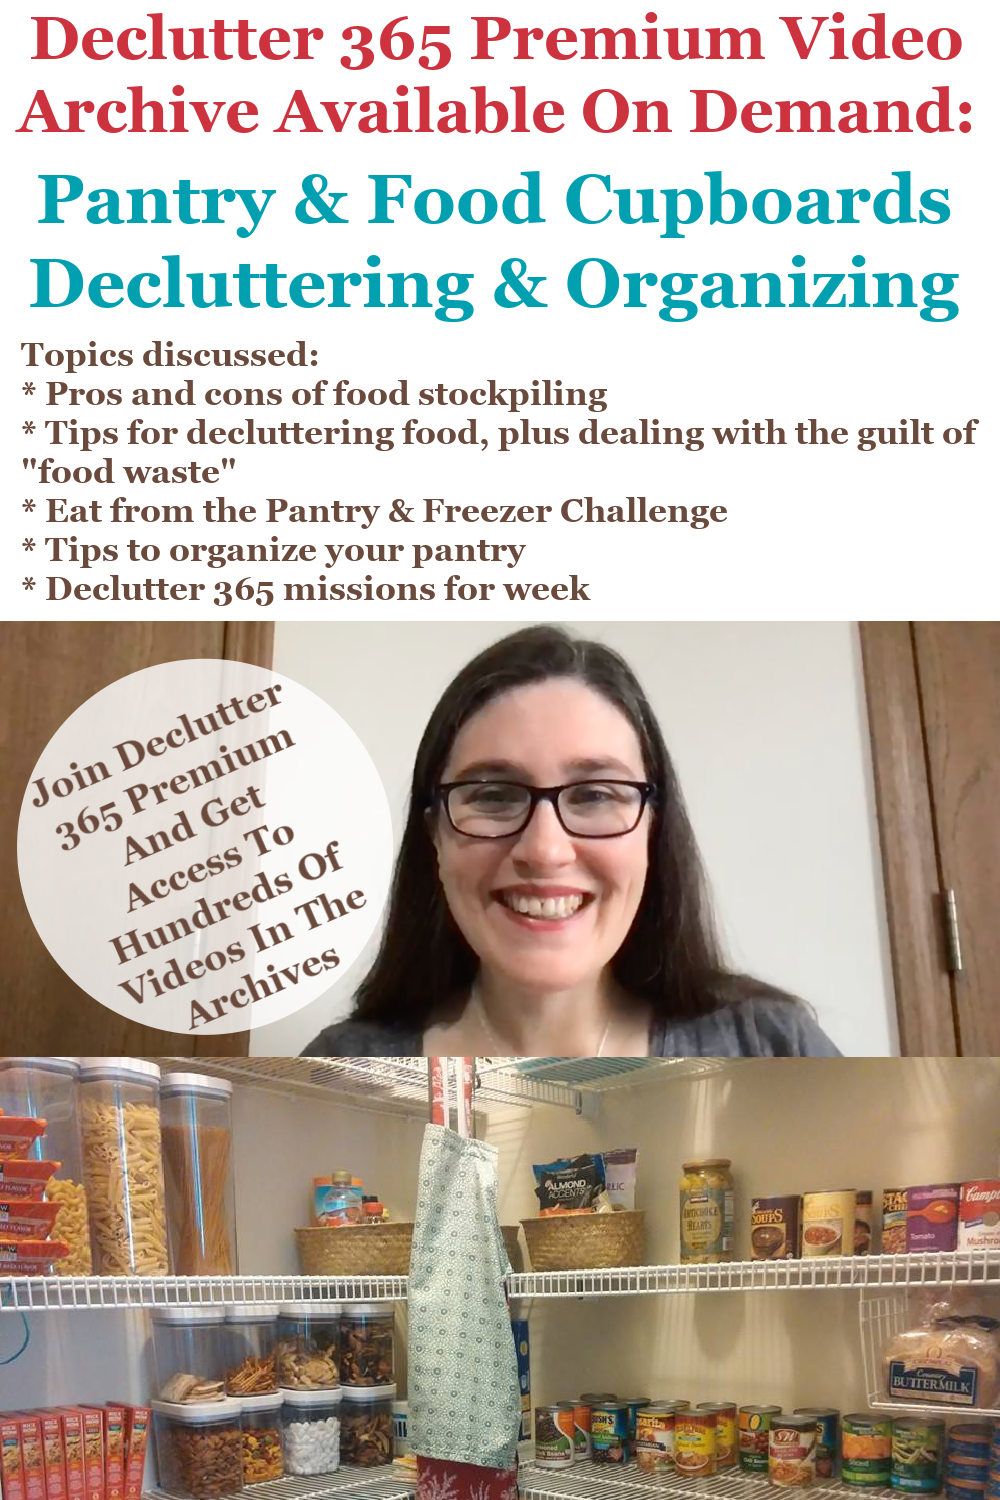 Declutter 365 Premium video archive available on demand all about decluttering and organizing your pantry and food cupboards, on Home Storage Solutions 101